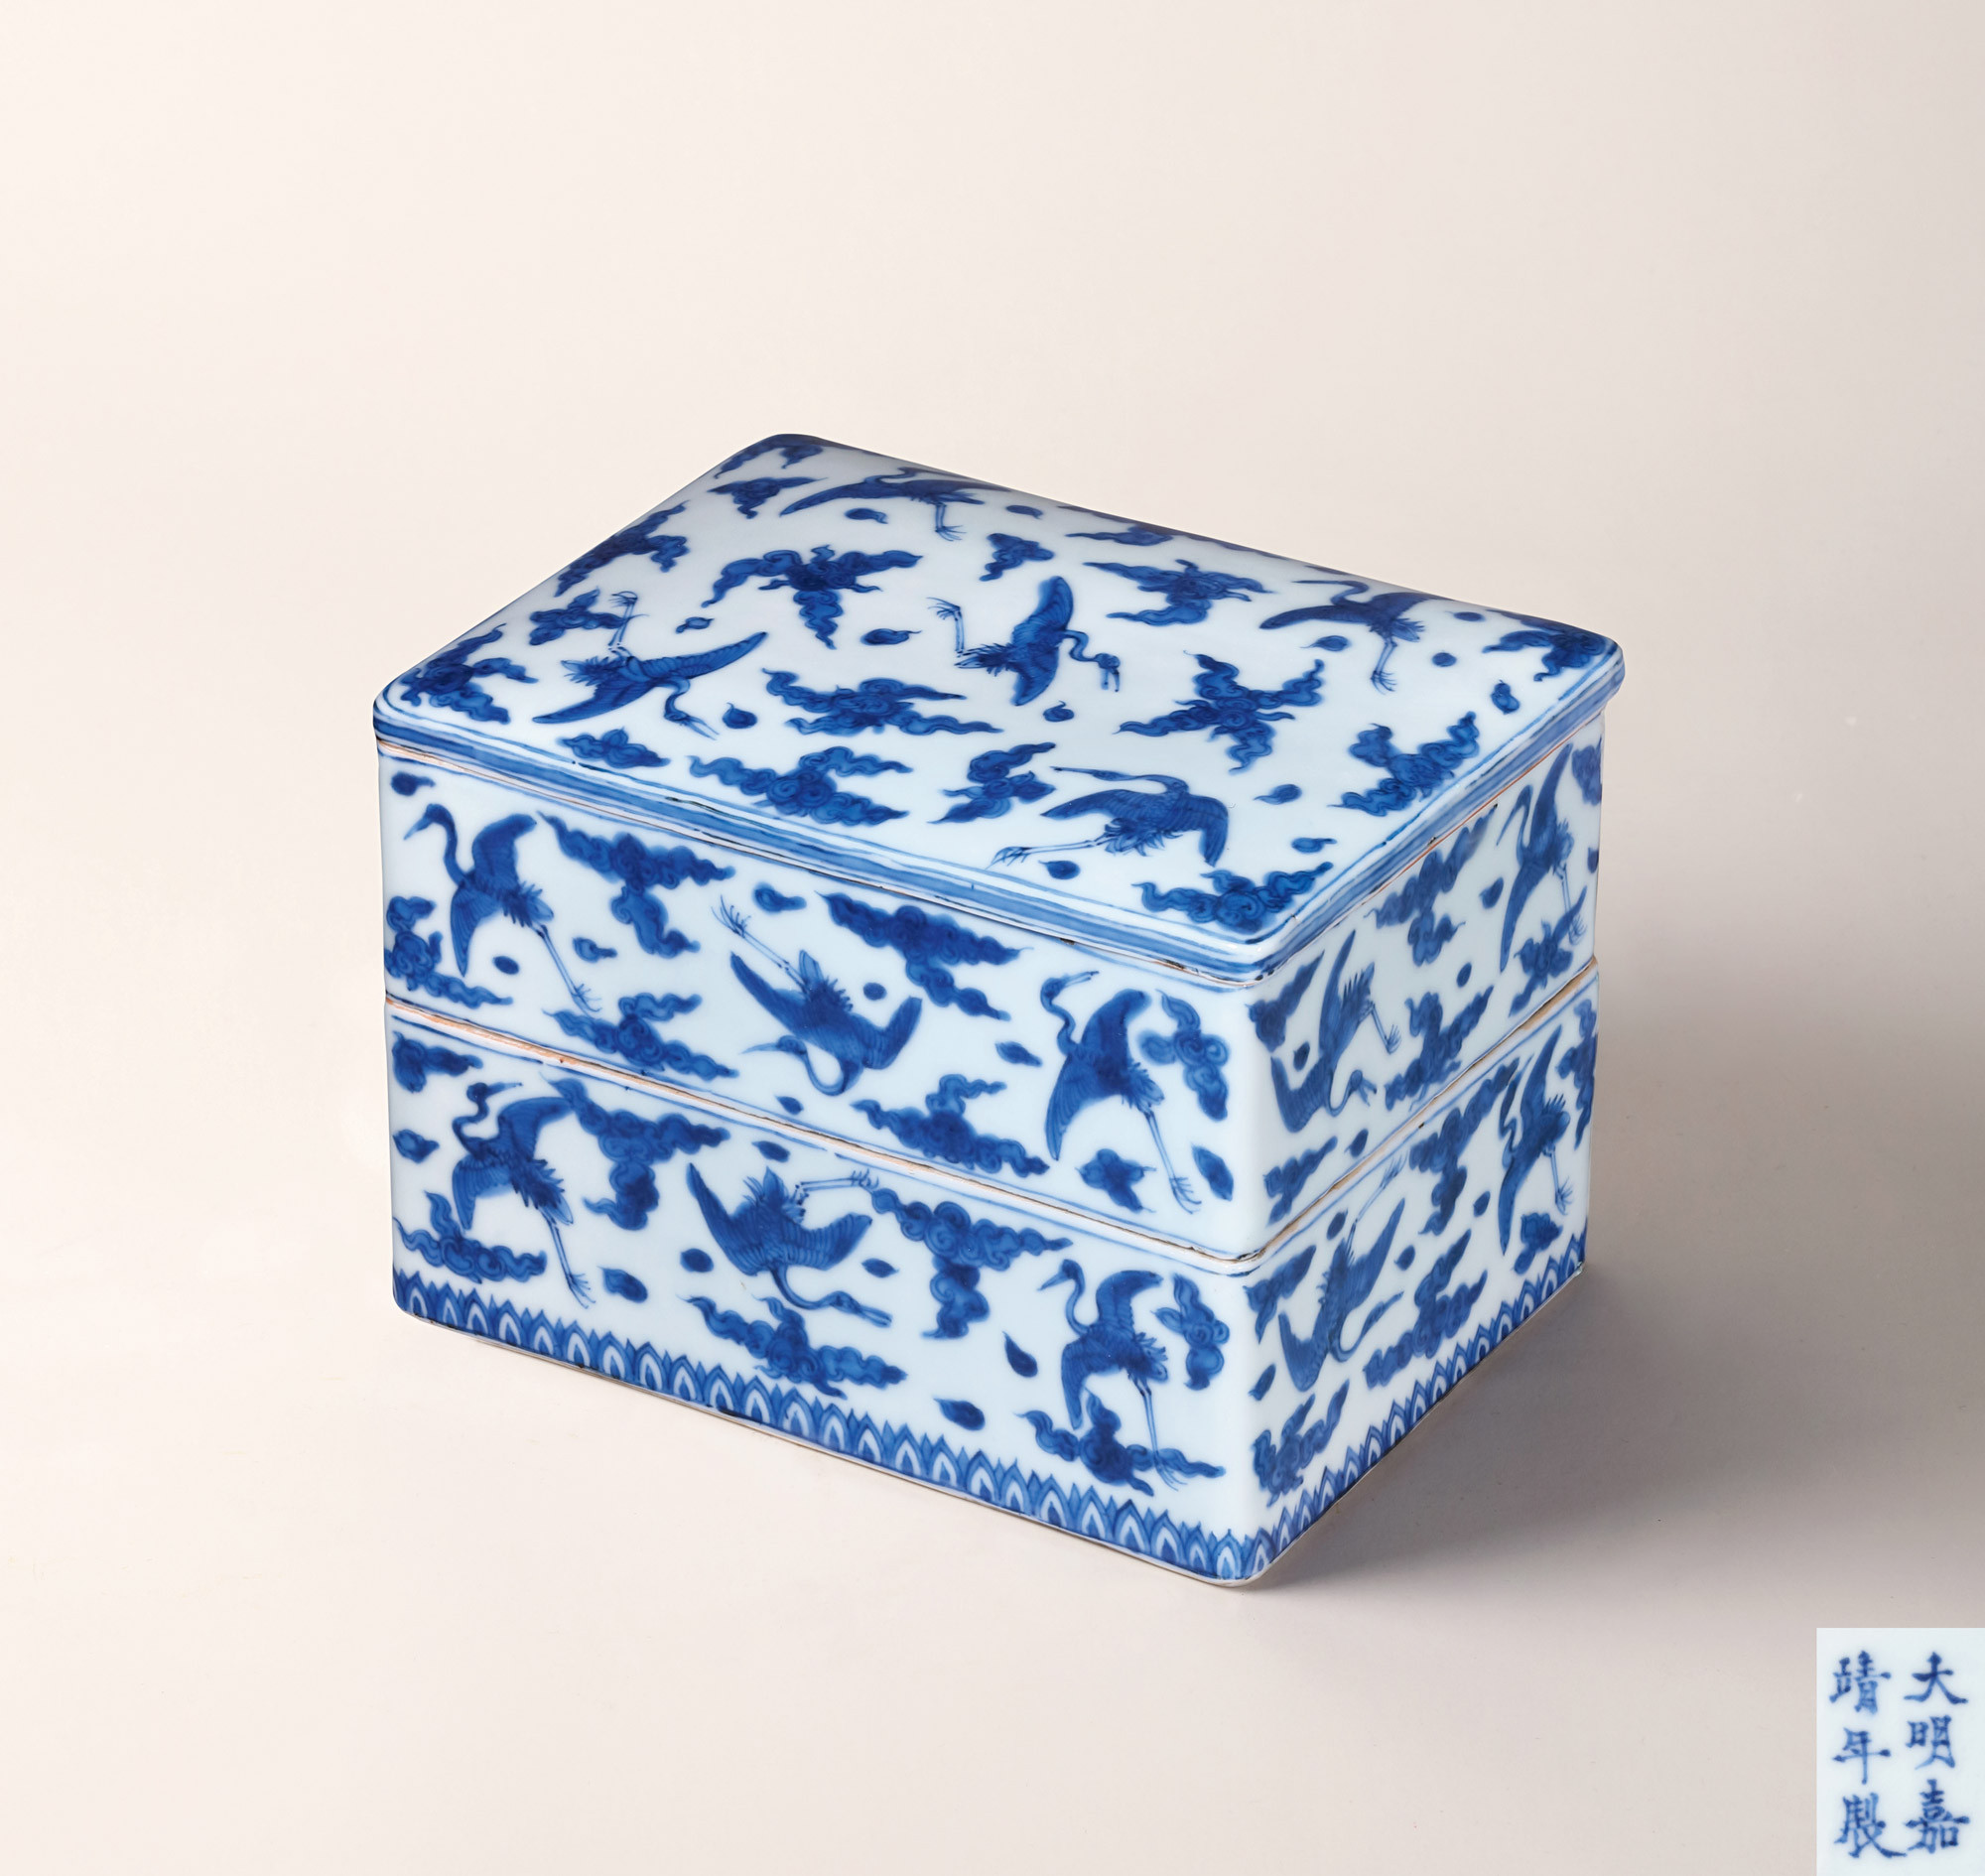 A BLUE AND WHITE‘LONGEVITY’BOX AND COVER